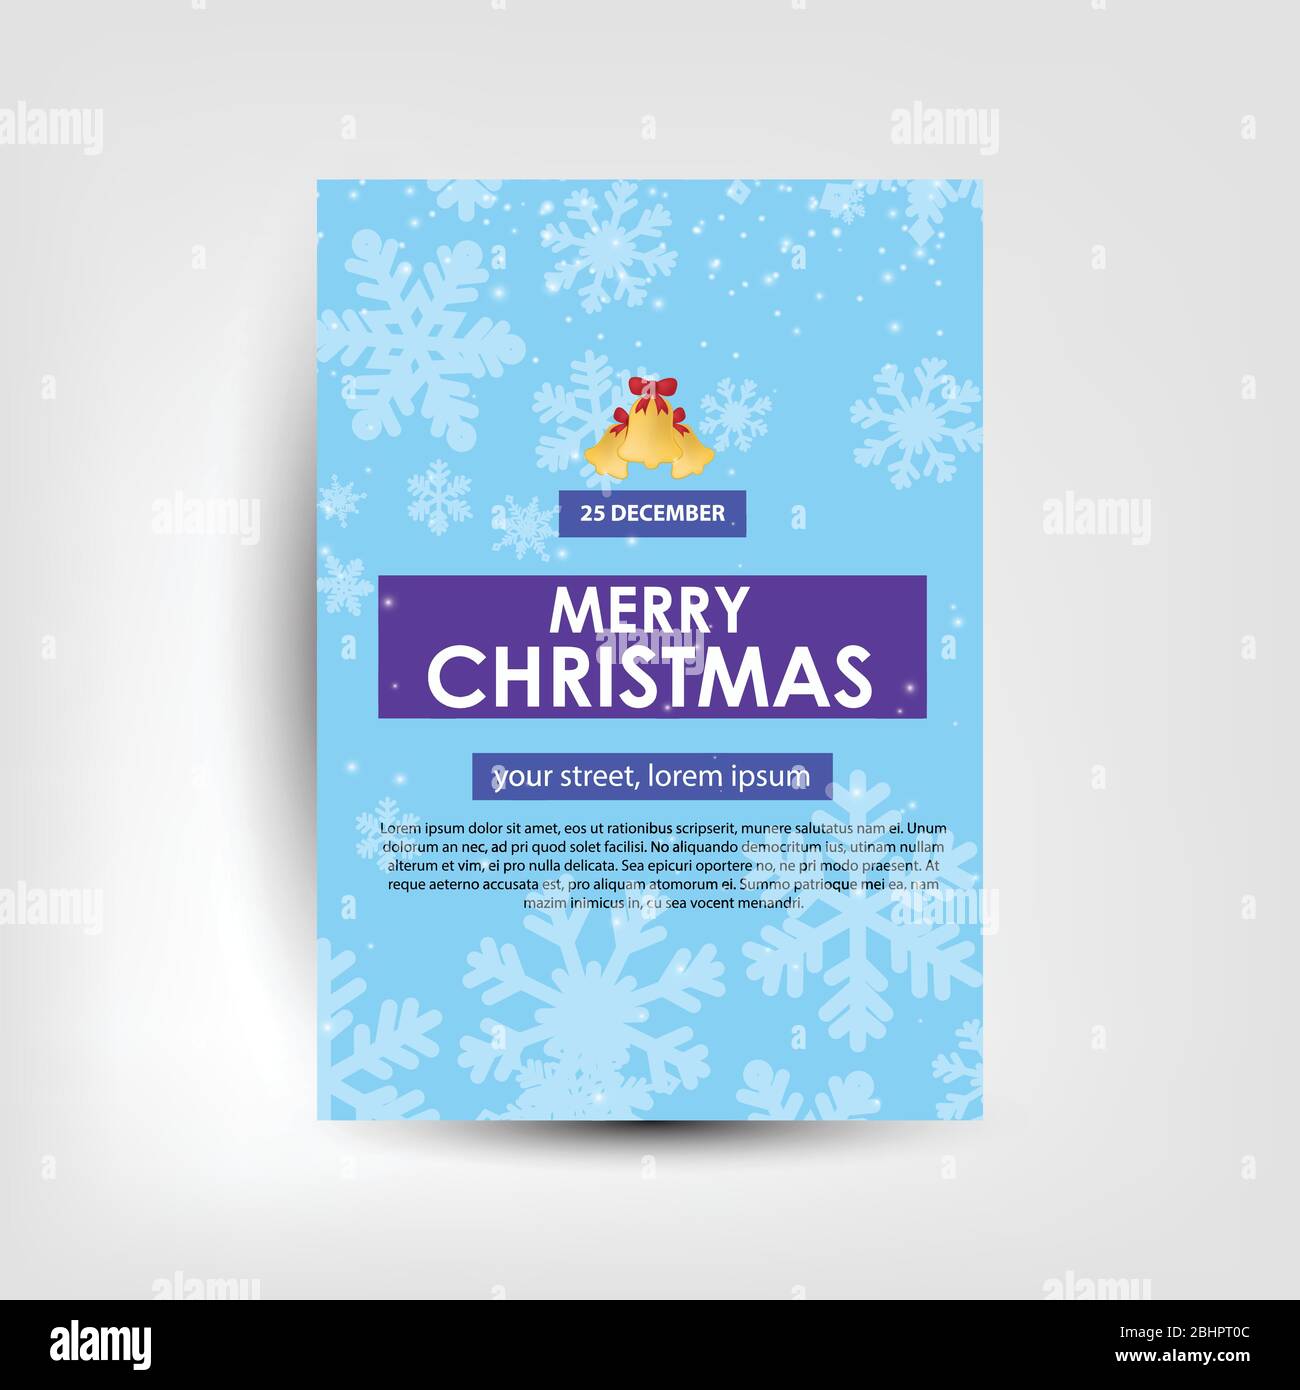 Merry Christmas party invitation Party Invitation Card Christmas Party poster Holiday design template Christmas Stock Vector